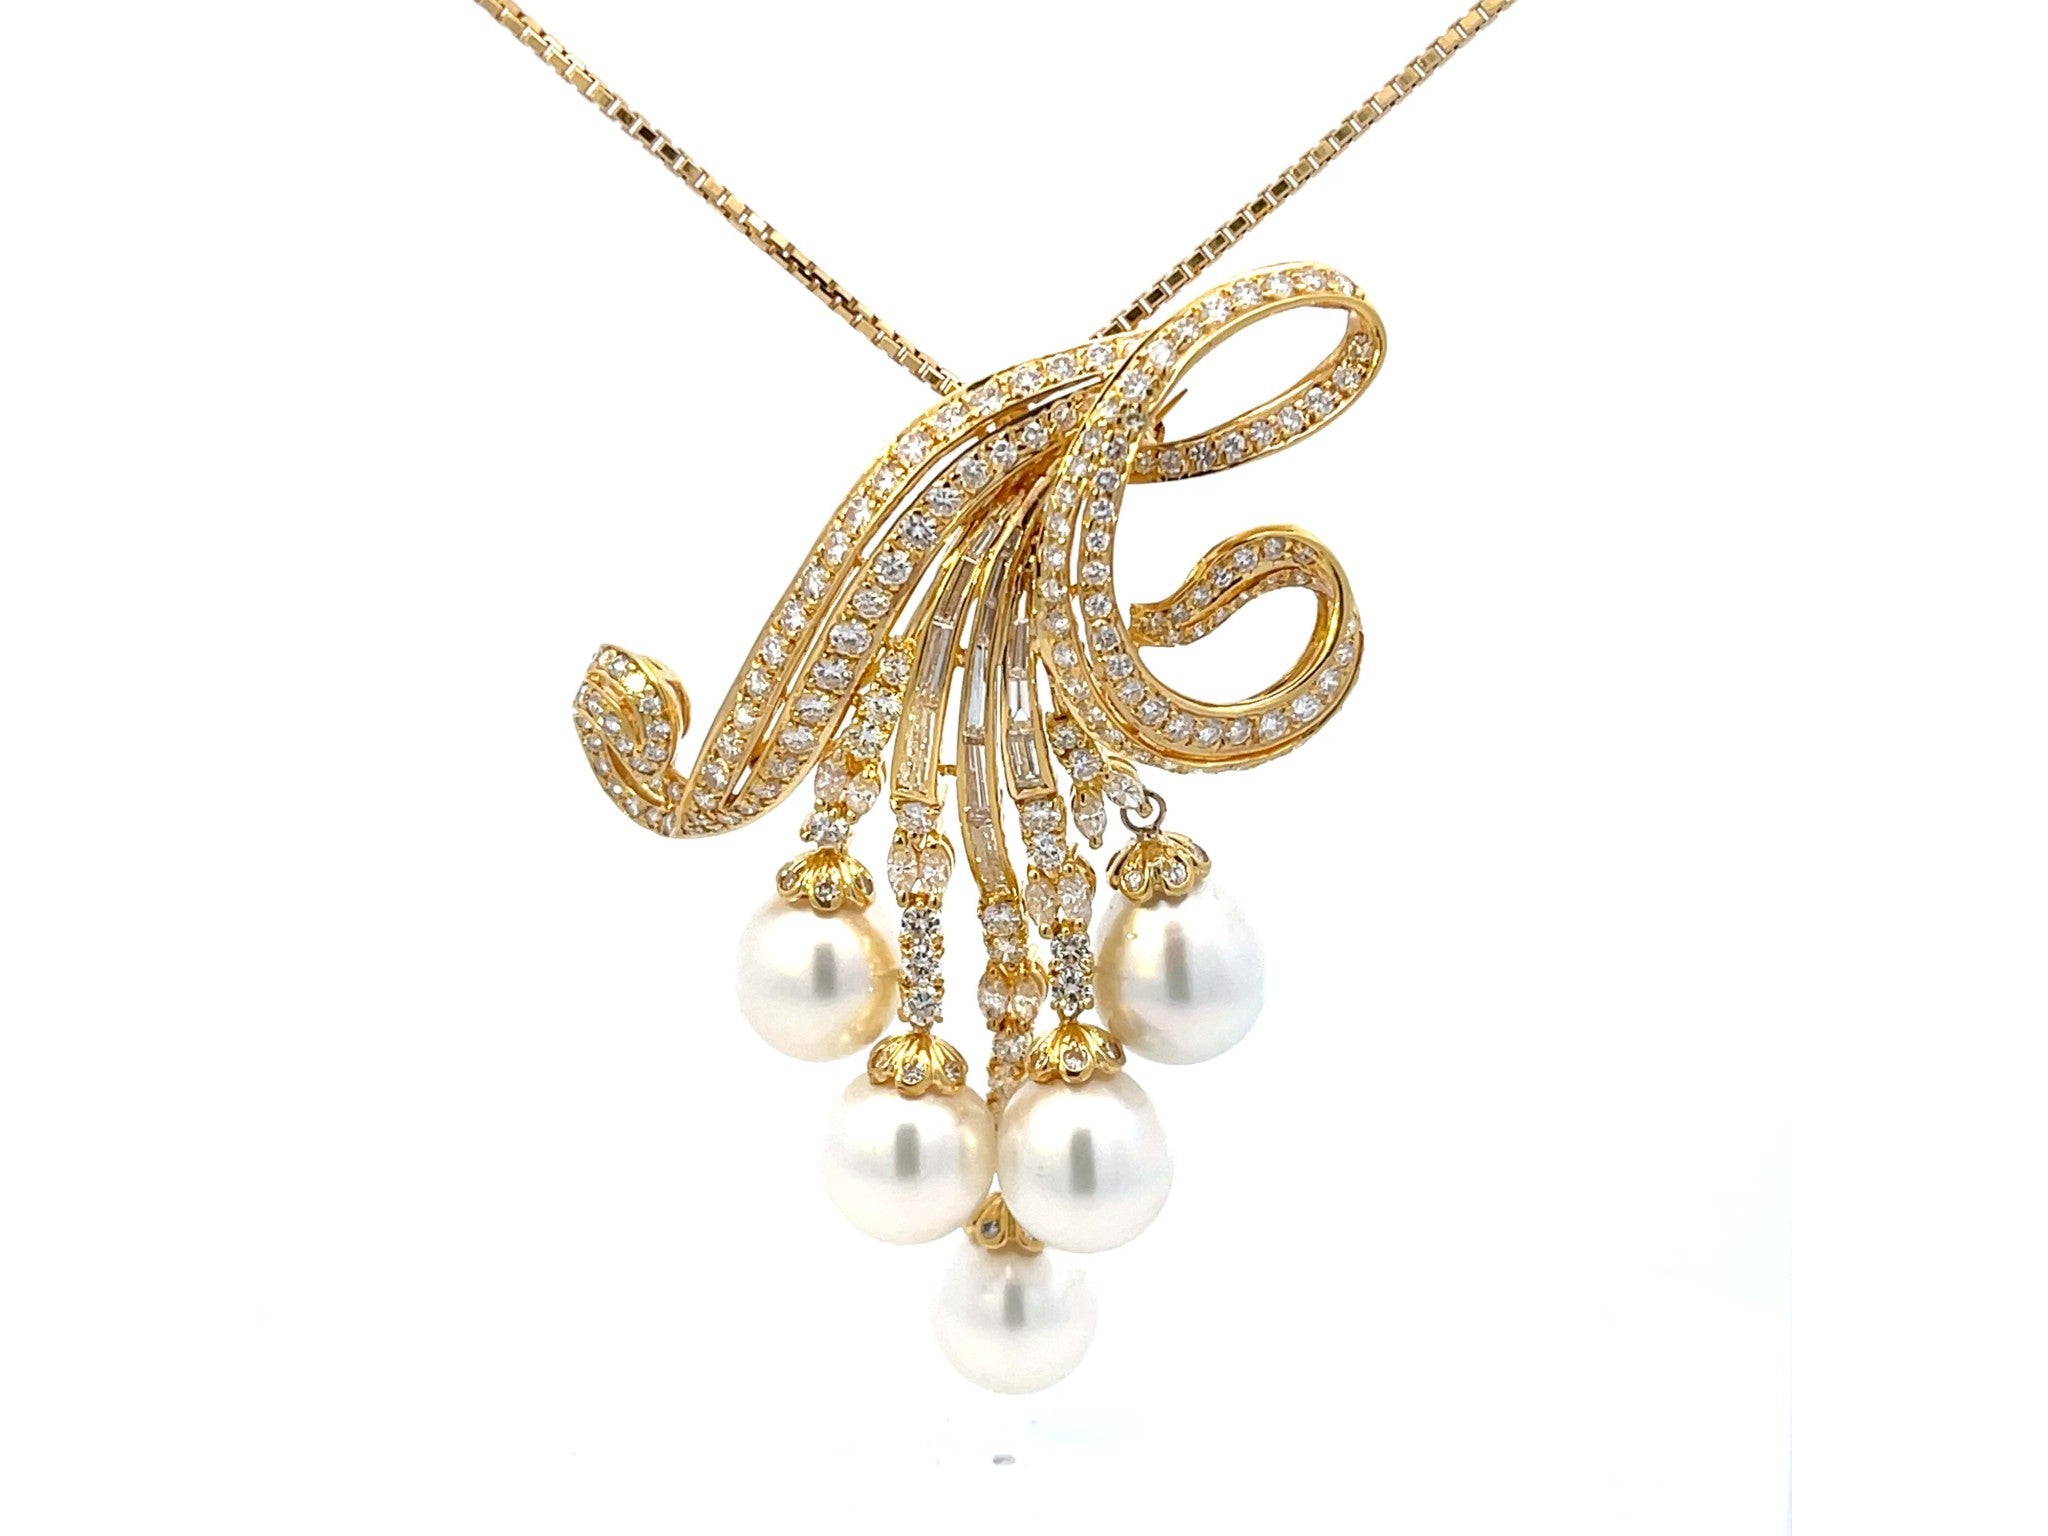 Large Diamond and Pearl Necklace in 18k Yellow Gold